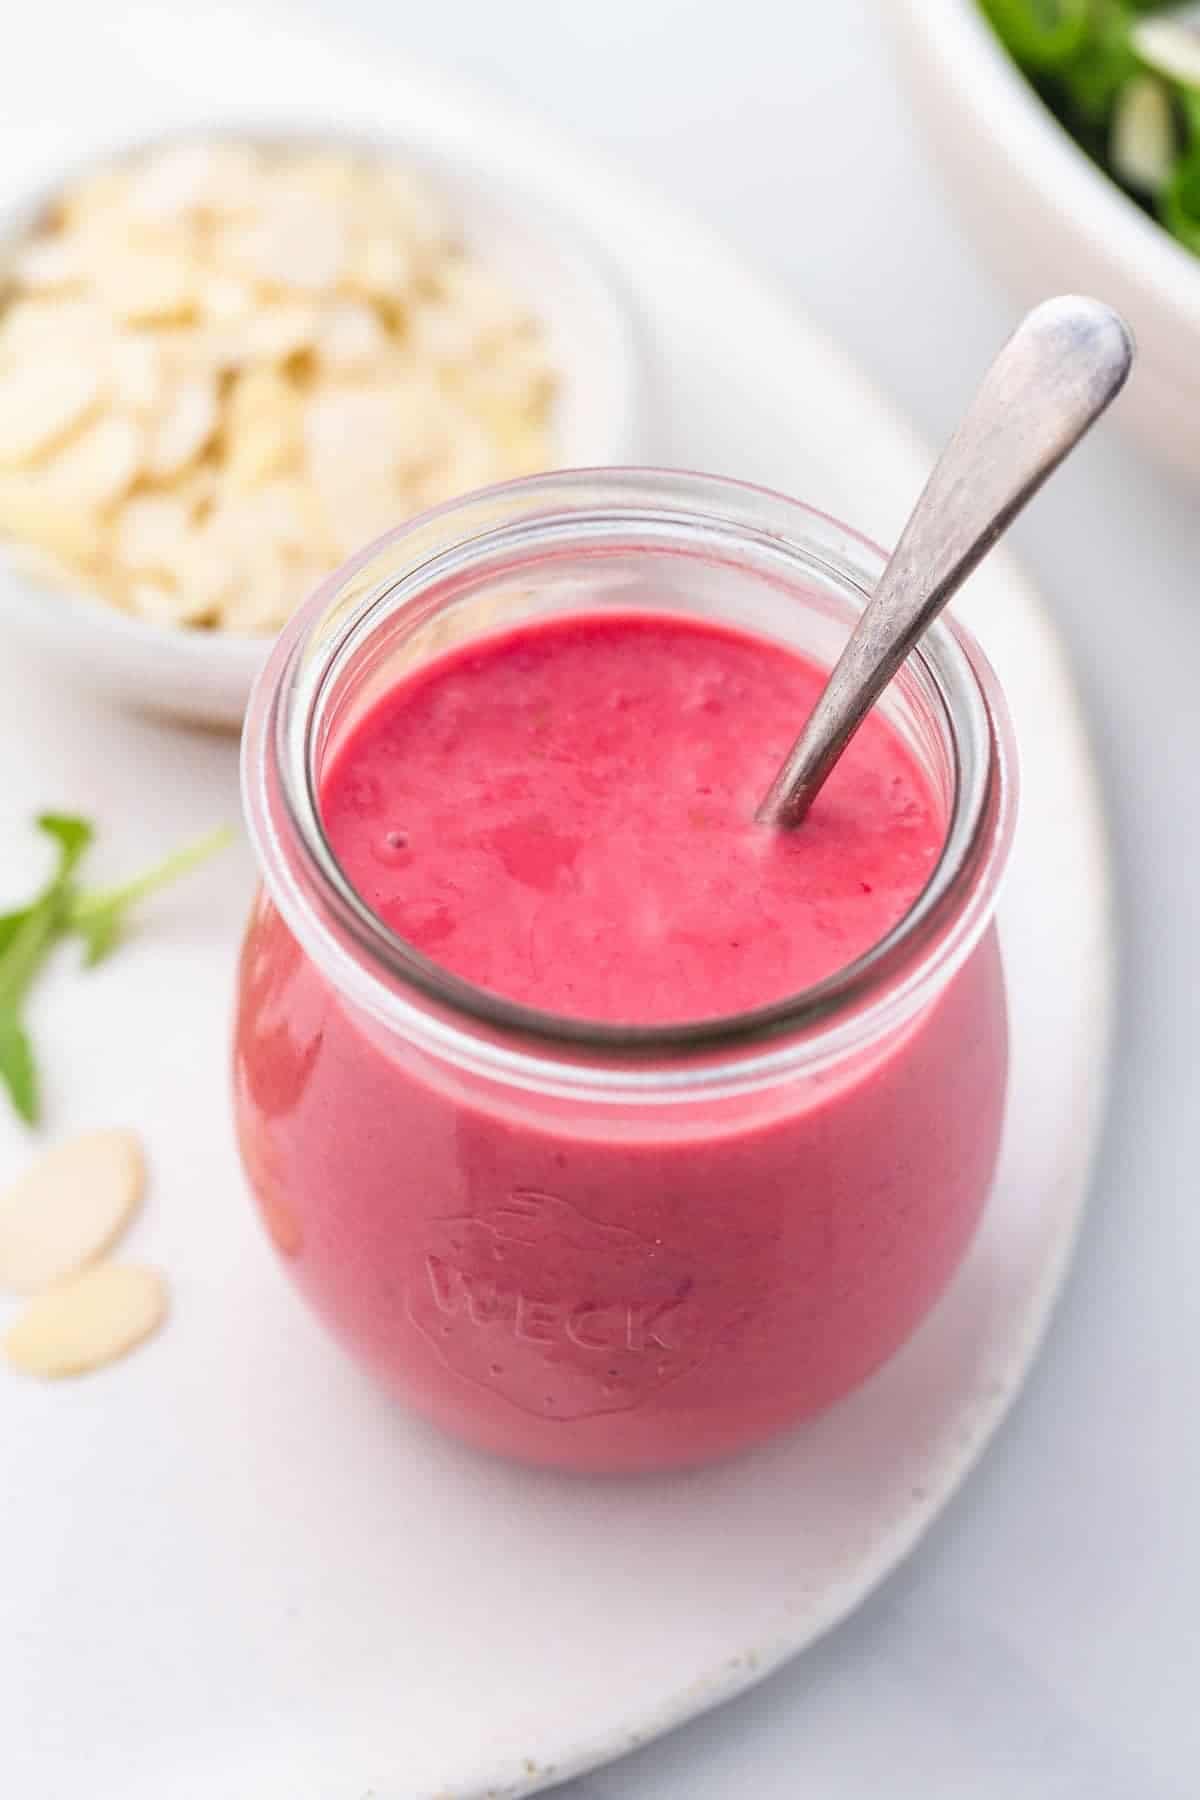 A small Weck jar with blended Raspberry Vinaigrette and a teaspoon